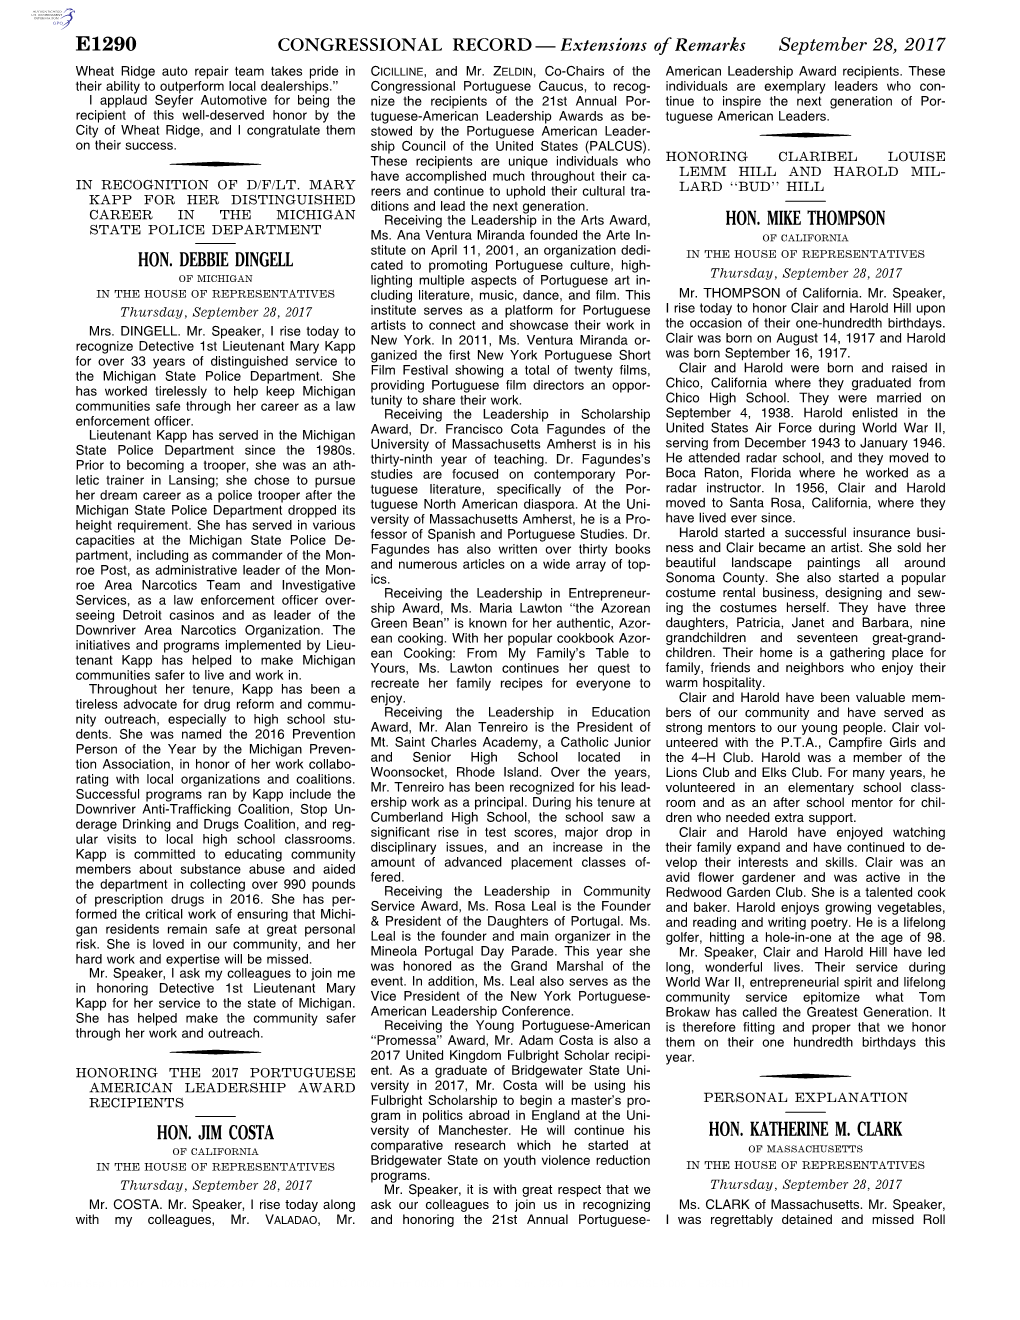 CONGRESSIONAL RECORD— Extensions of Remarks E1290 HON. DEBBIE DINGELL HON. JIM COSTA HON. MIKE THOMPSON HON. KATHERINE M. CLAR